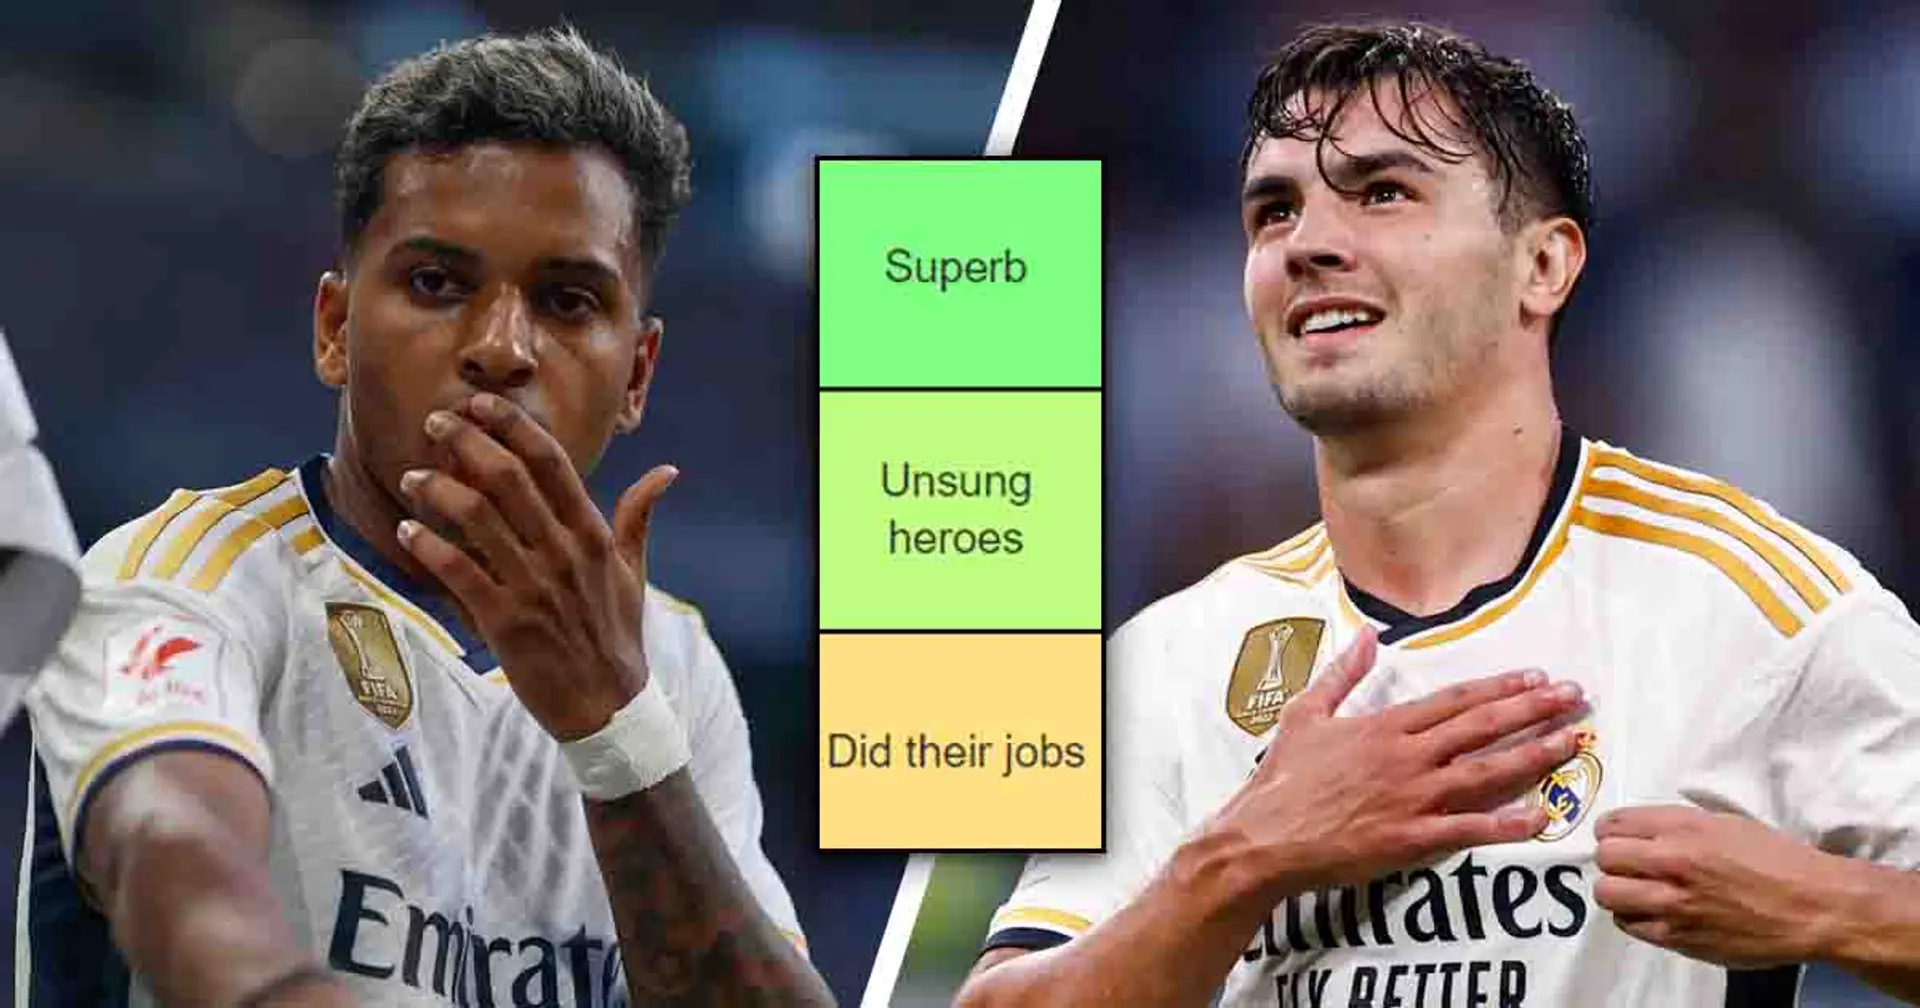 4 players superb, 3 unsung heroes: Real Madrid players performance tier list for Las Palmas win